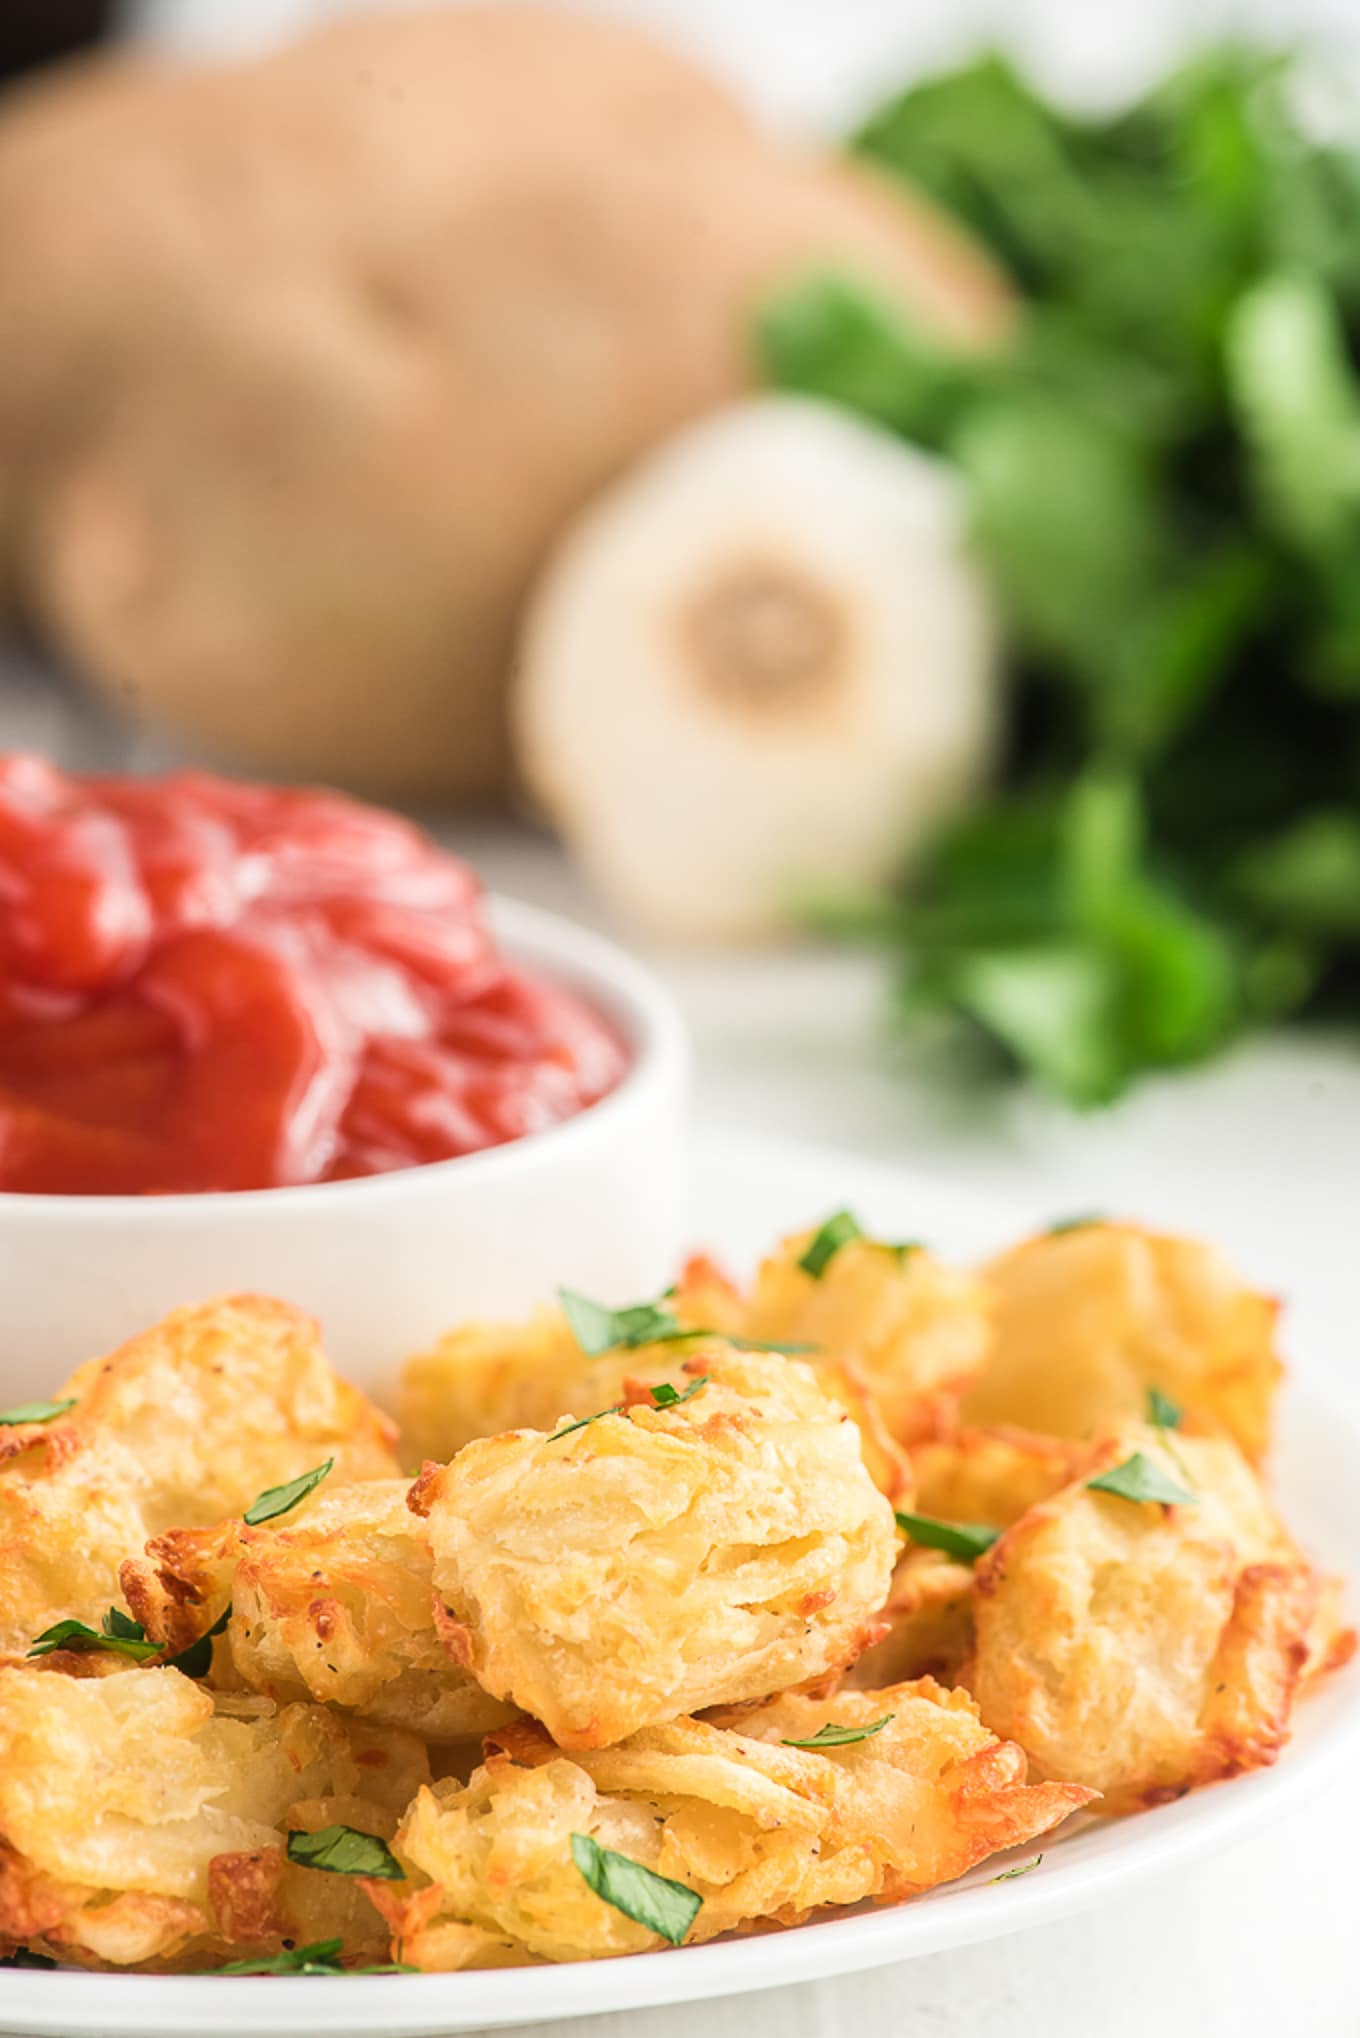 homemade tater tots on a plate with a side of ketchup. /